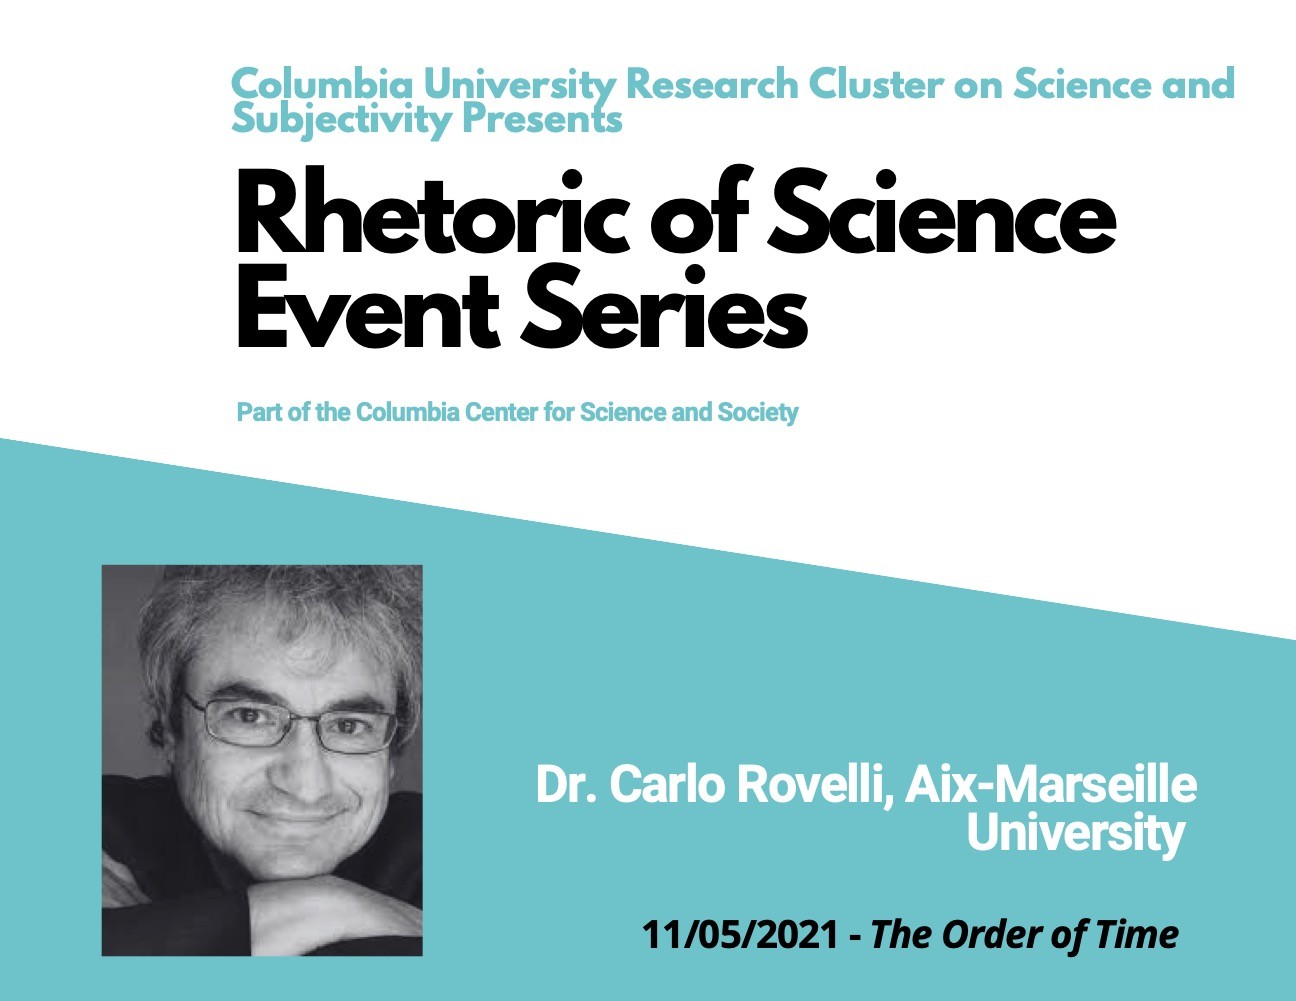 Columbia University Research Cluster of Science and Subjectivity presents Rhetoric of Science event series. 11/05/21 the Order of Time. 